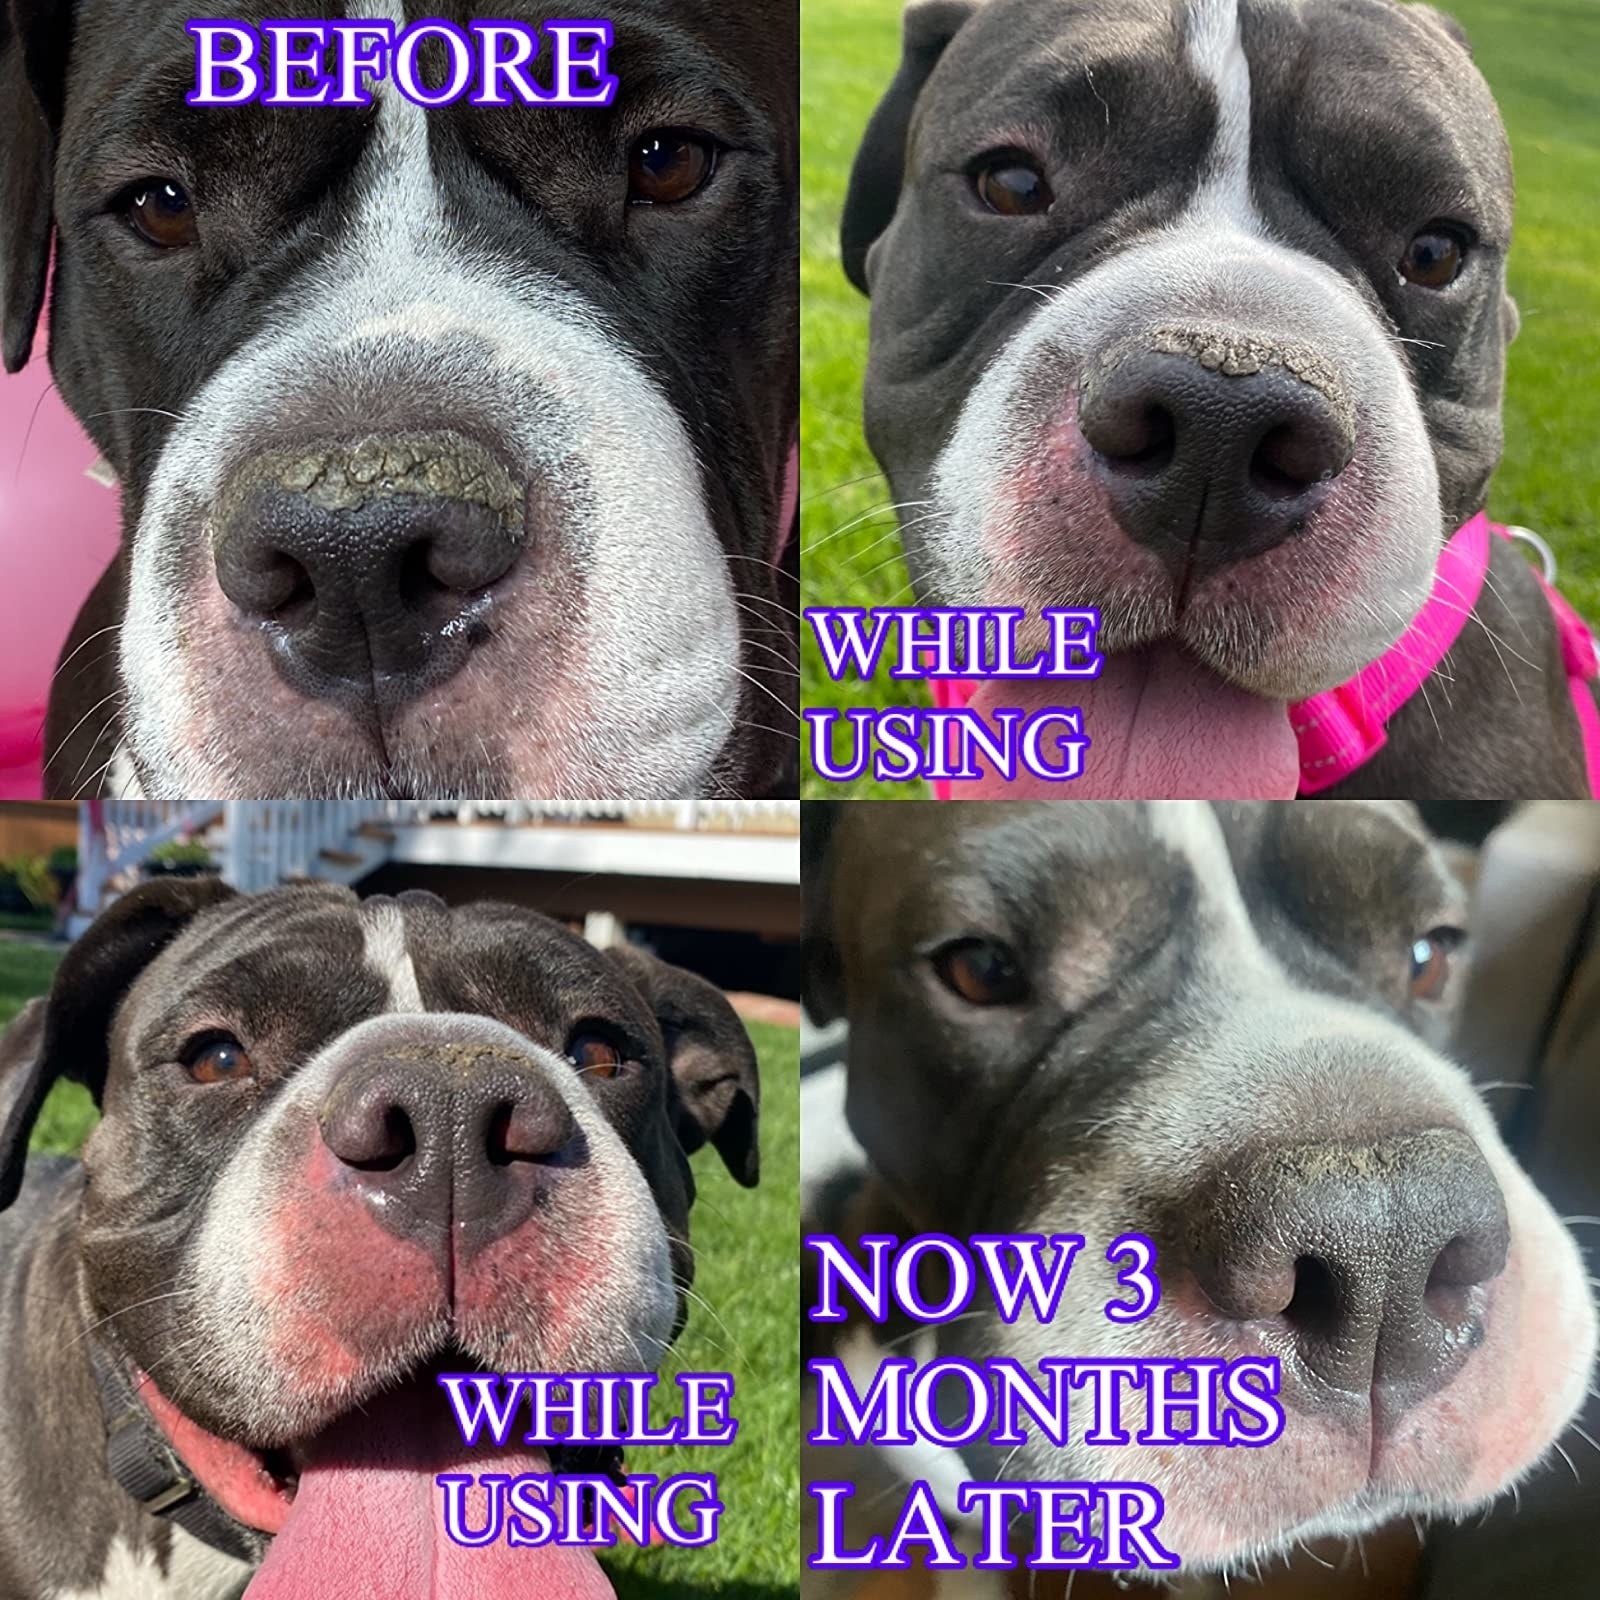 from top left to bottom right: progression picture of dog's nose with crusty dry spots versus mostly-cleared up skin after three months of use